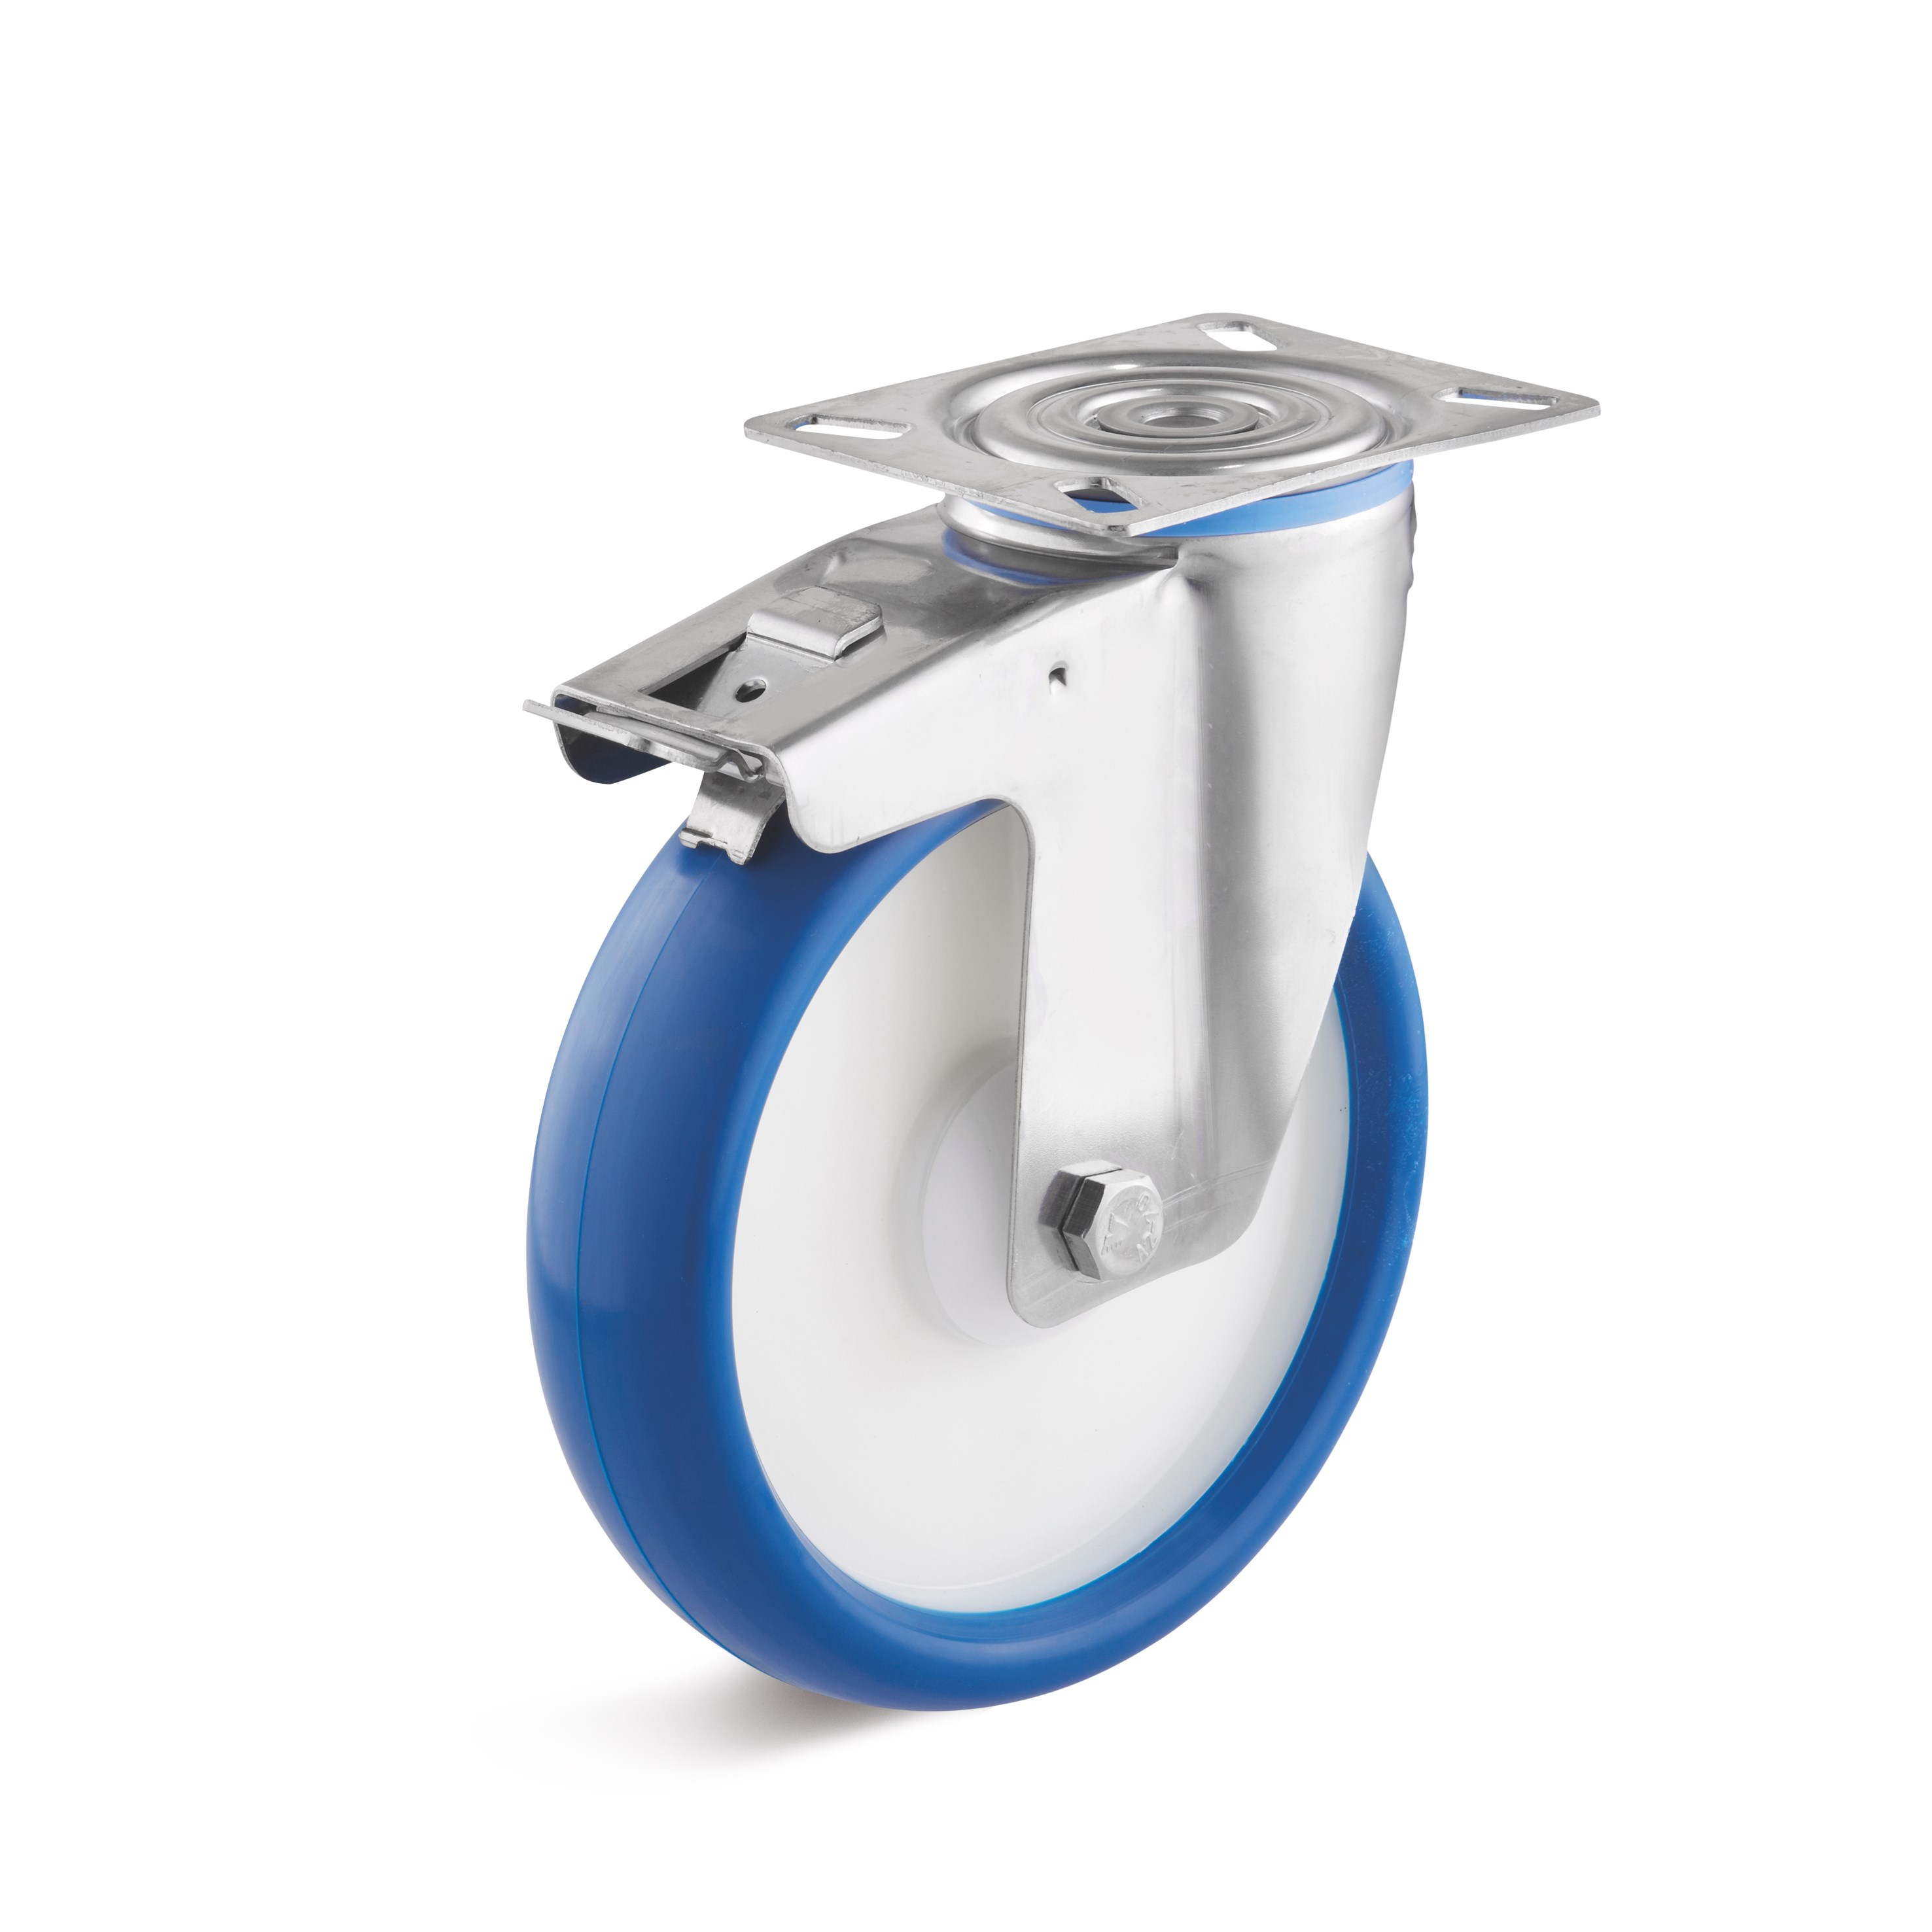 Stainless steel swivel castor with double stop and polyurethane wheel